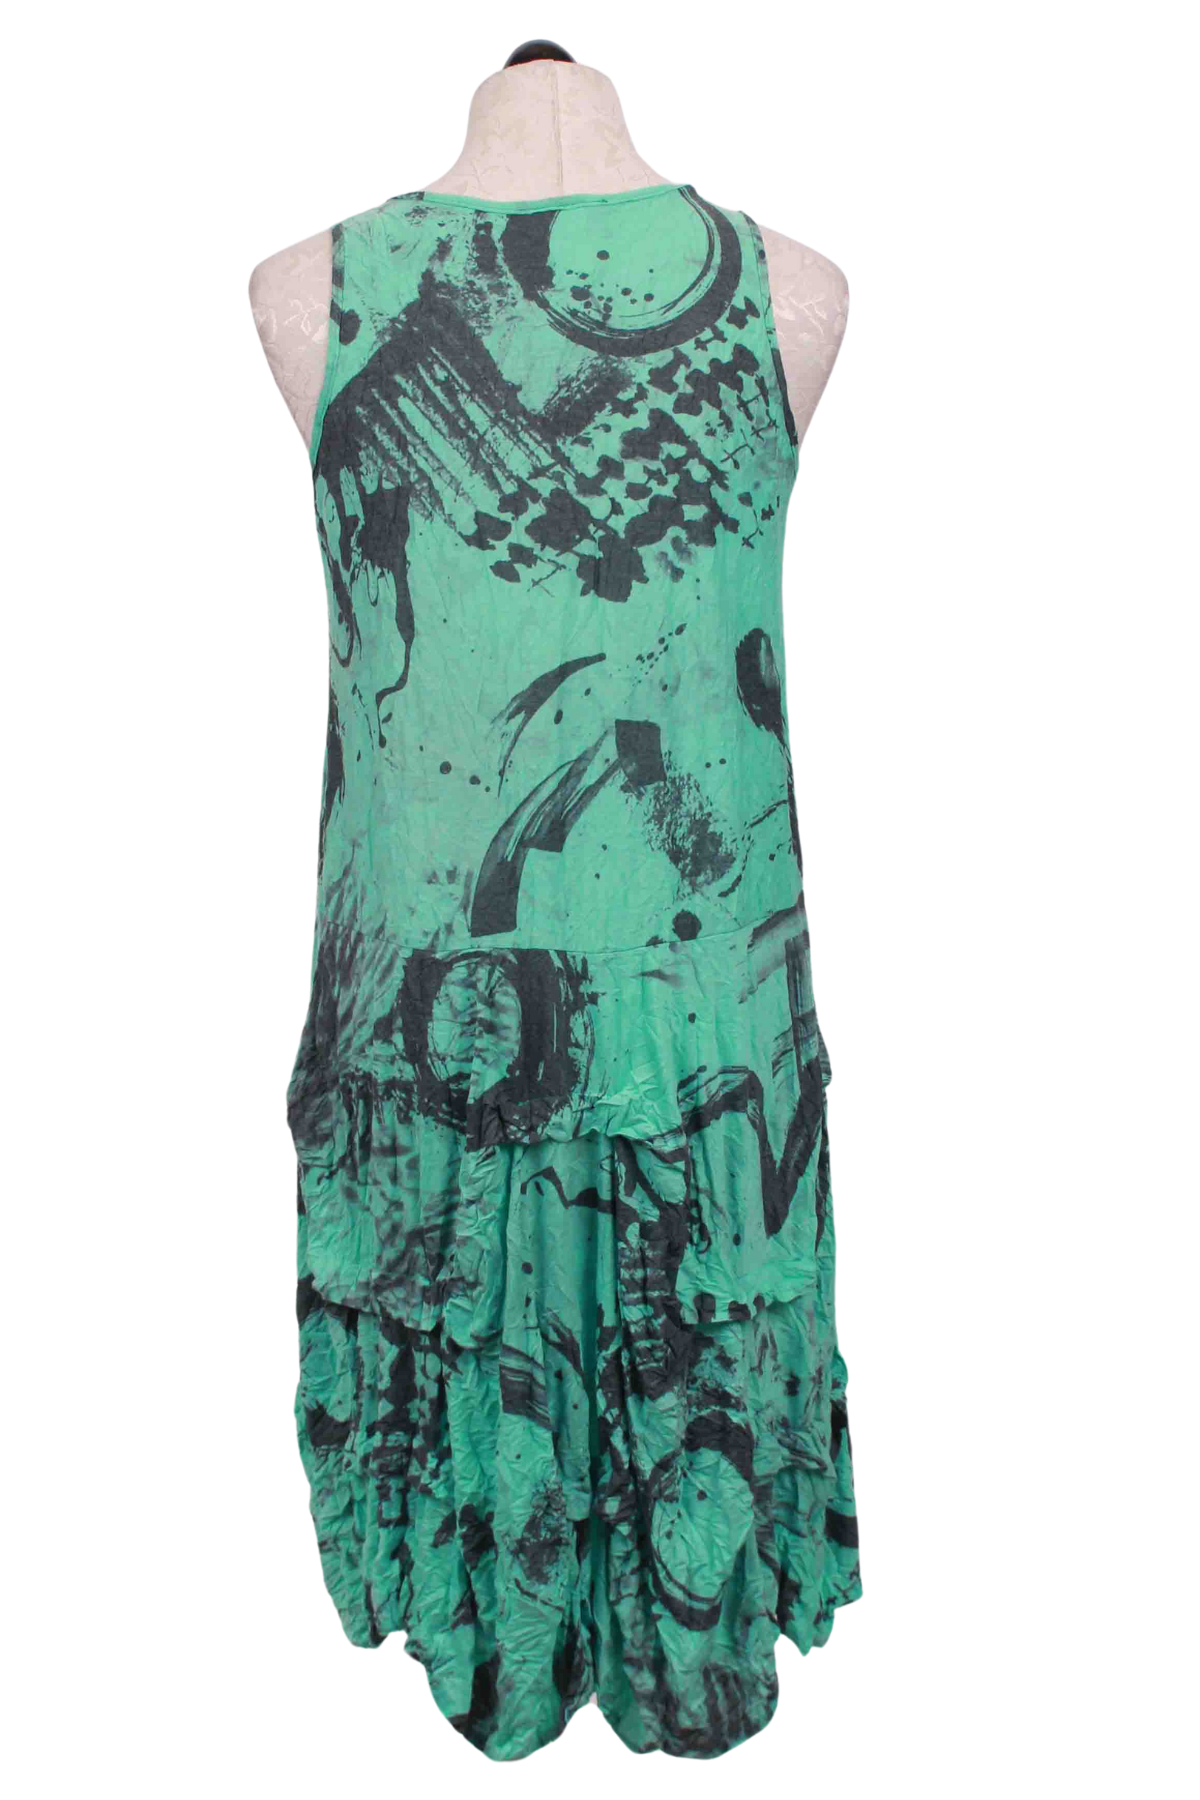 back view of Sleeveless Mint Circles Crinkle Dress by Reina Lee